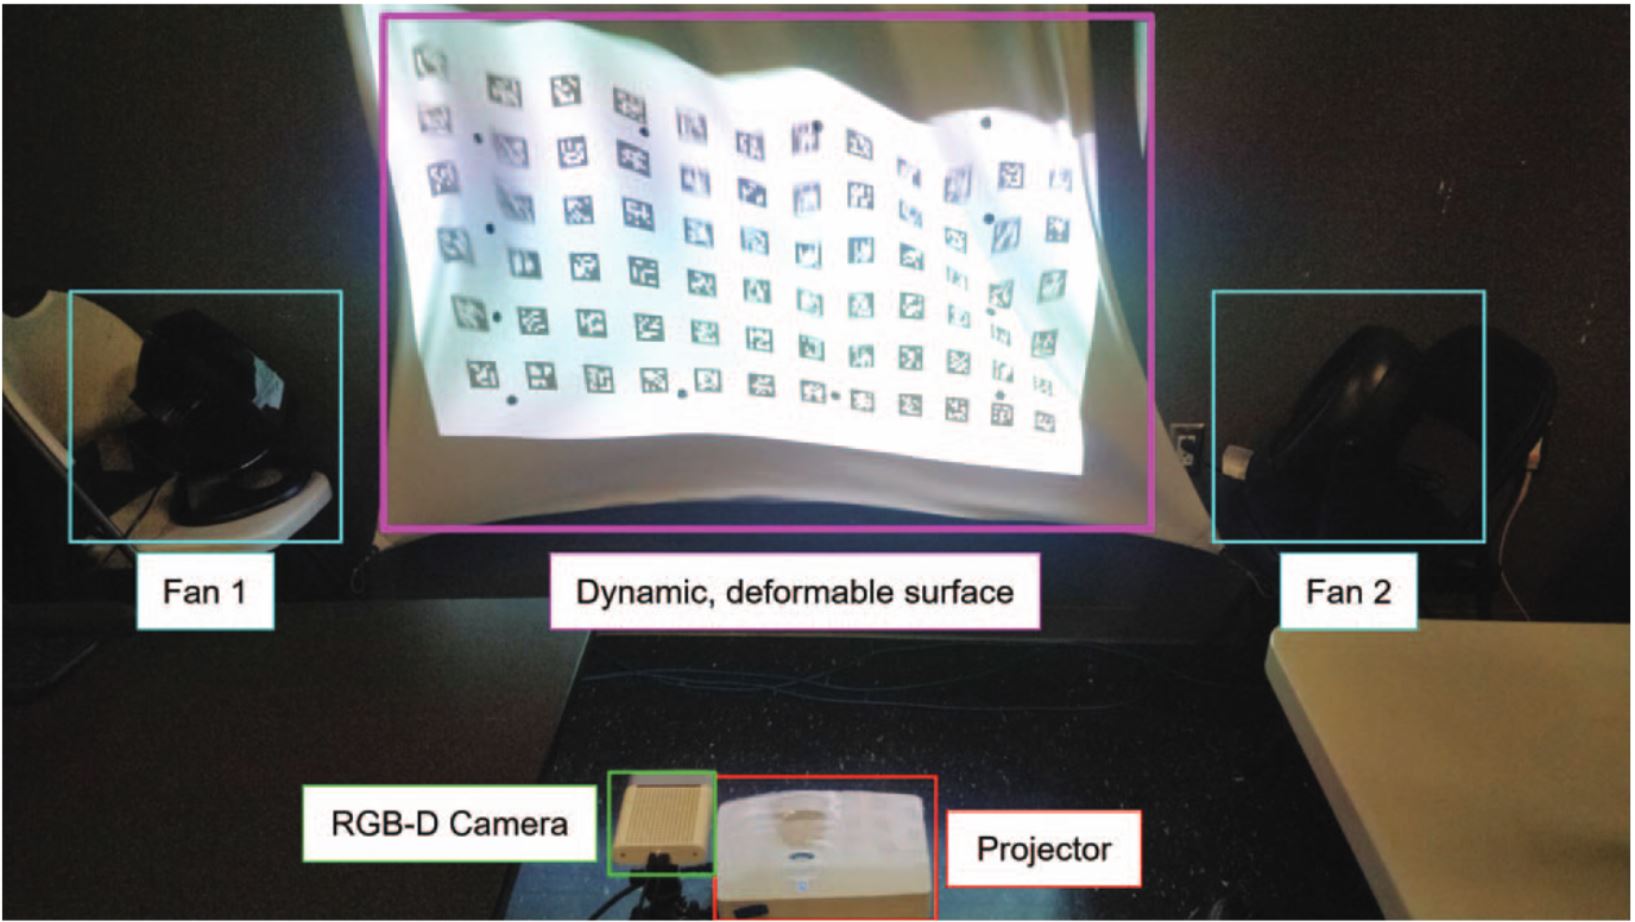 Self-Calibrating Dynamic Projection Mapping System for Dynamic, Deformable Surfaces with Jitter Correction and Occlusion Handling